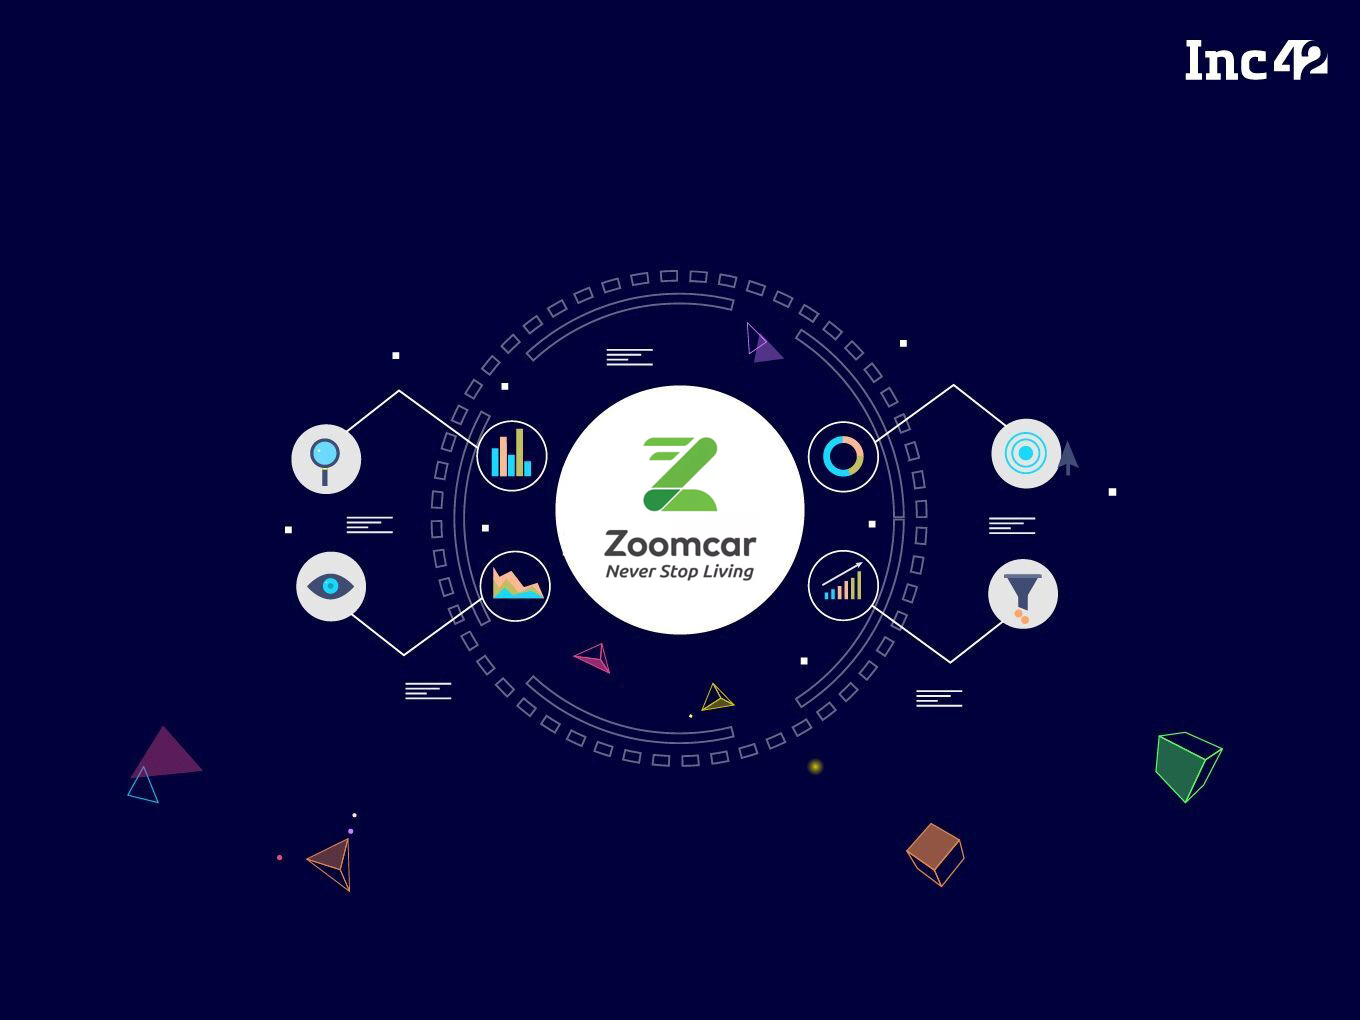 [What The Financials] Zoomcar Spent 2X What It Earned In FY20, And It's Only Likely To Get Worse